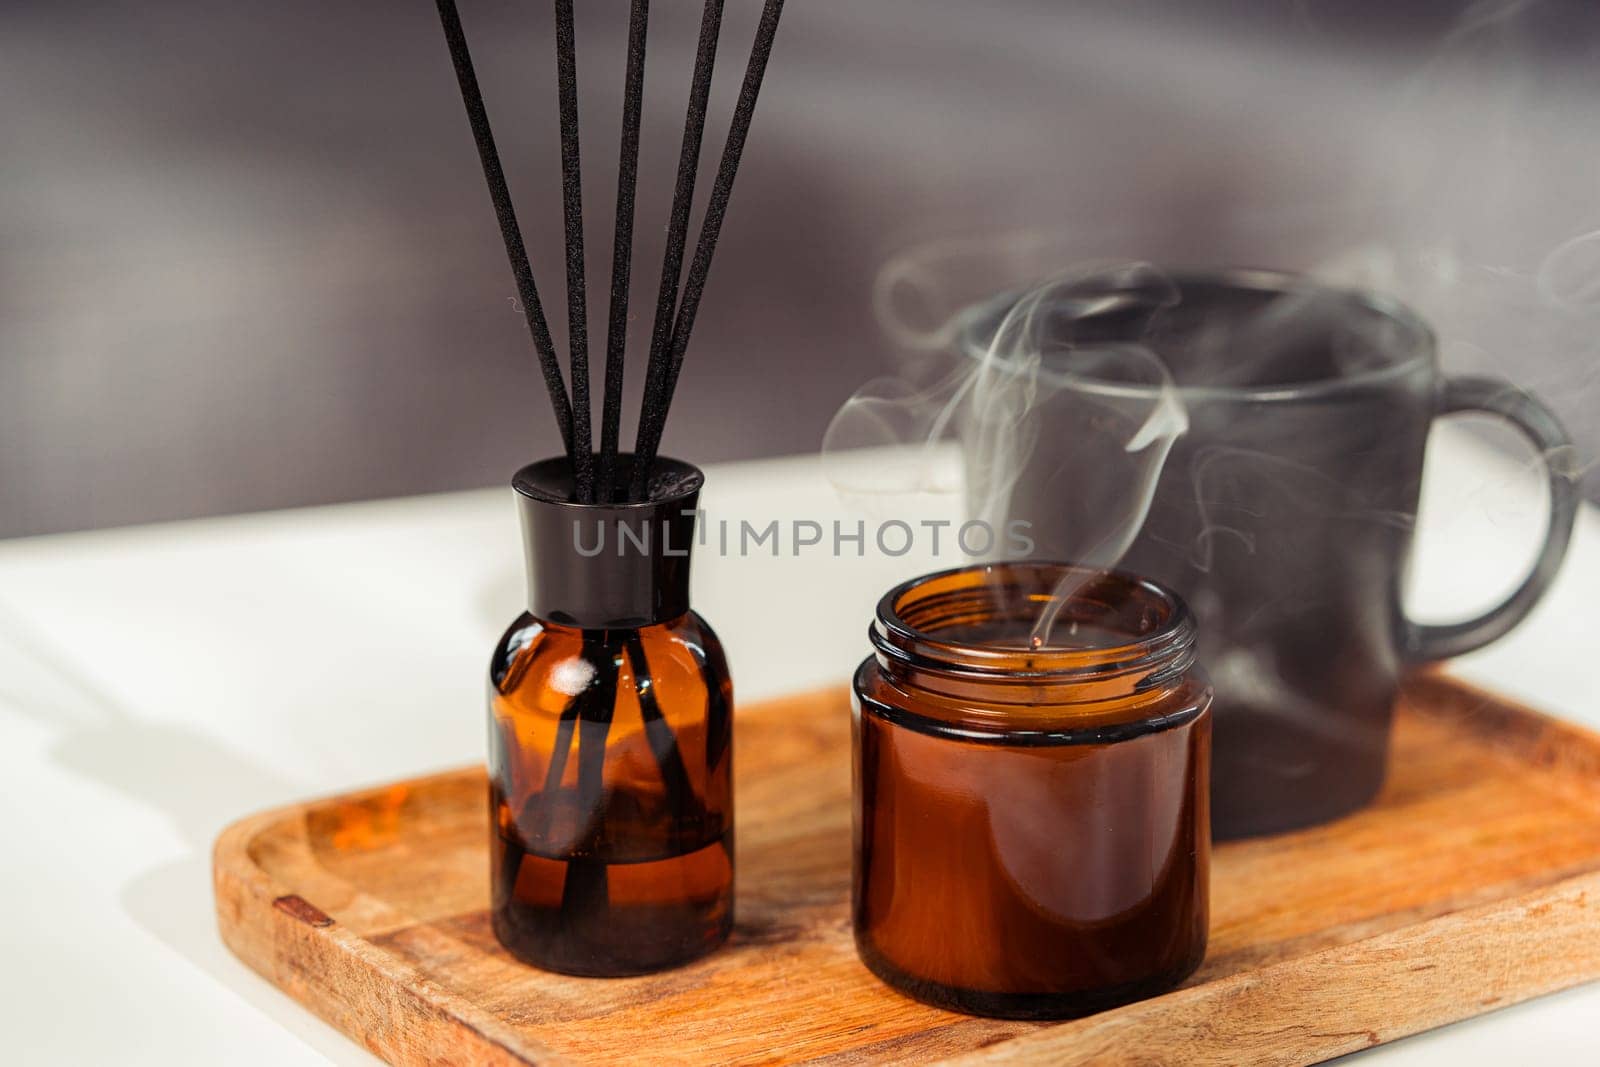 Aromatic reed freshener and candle on table in room close up